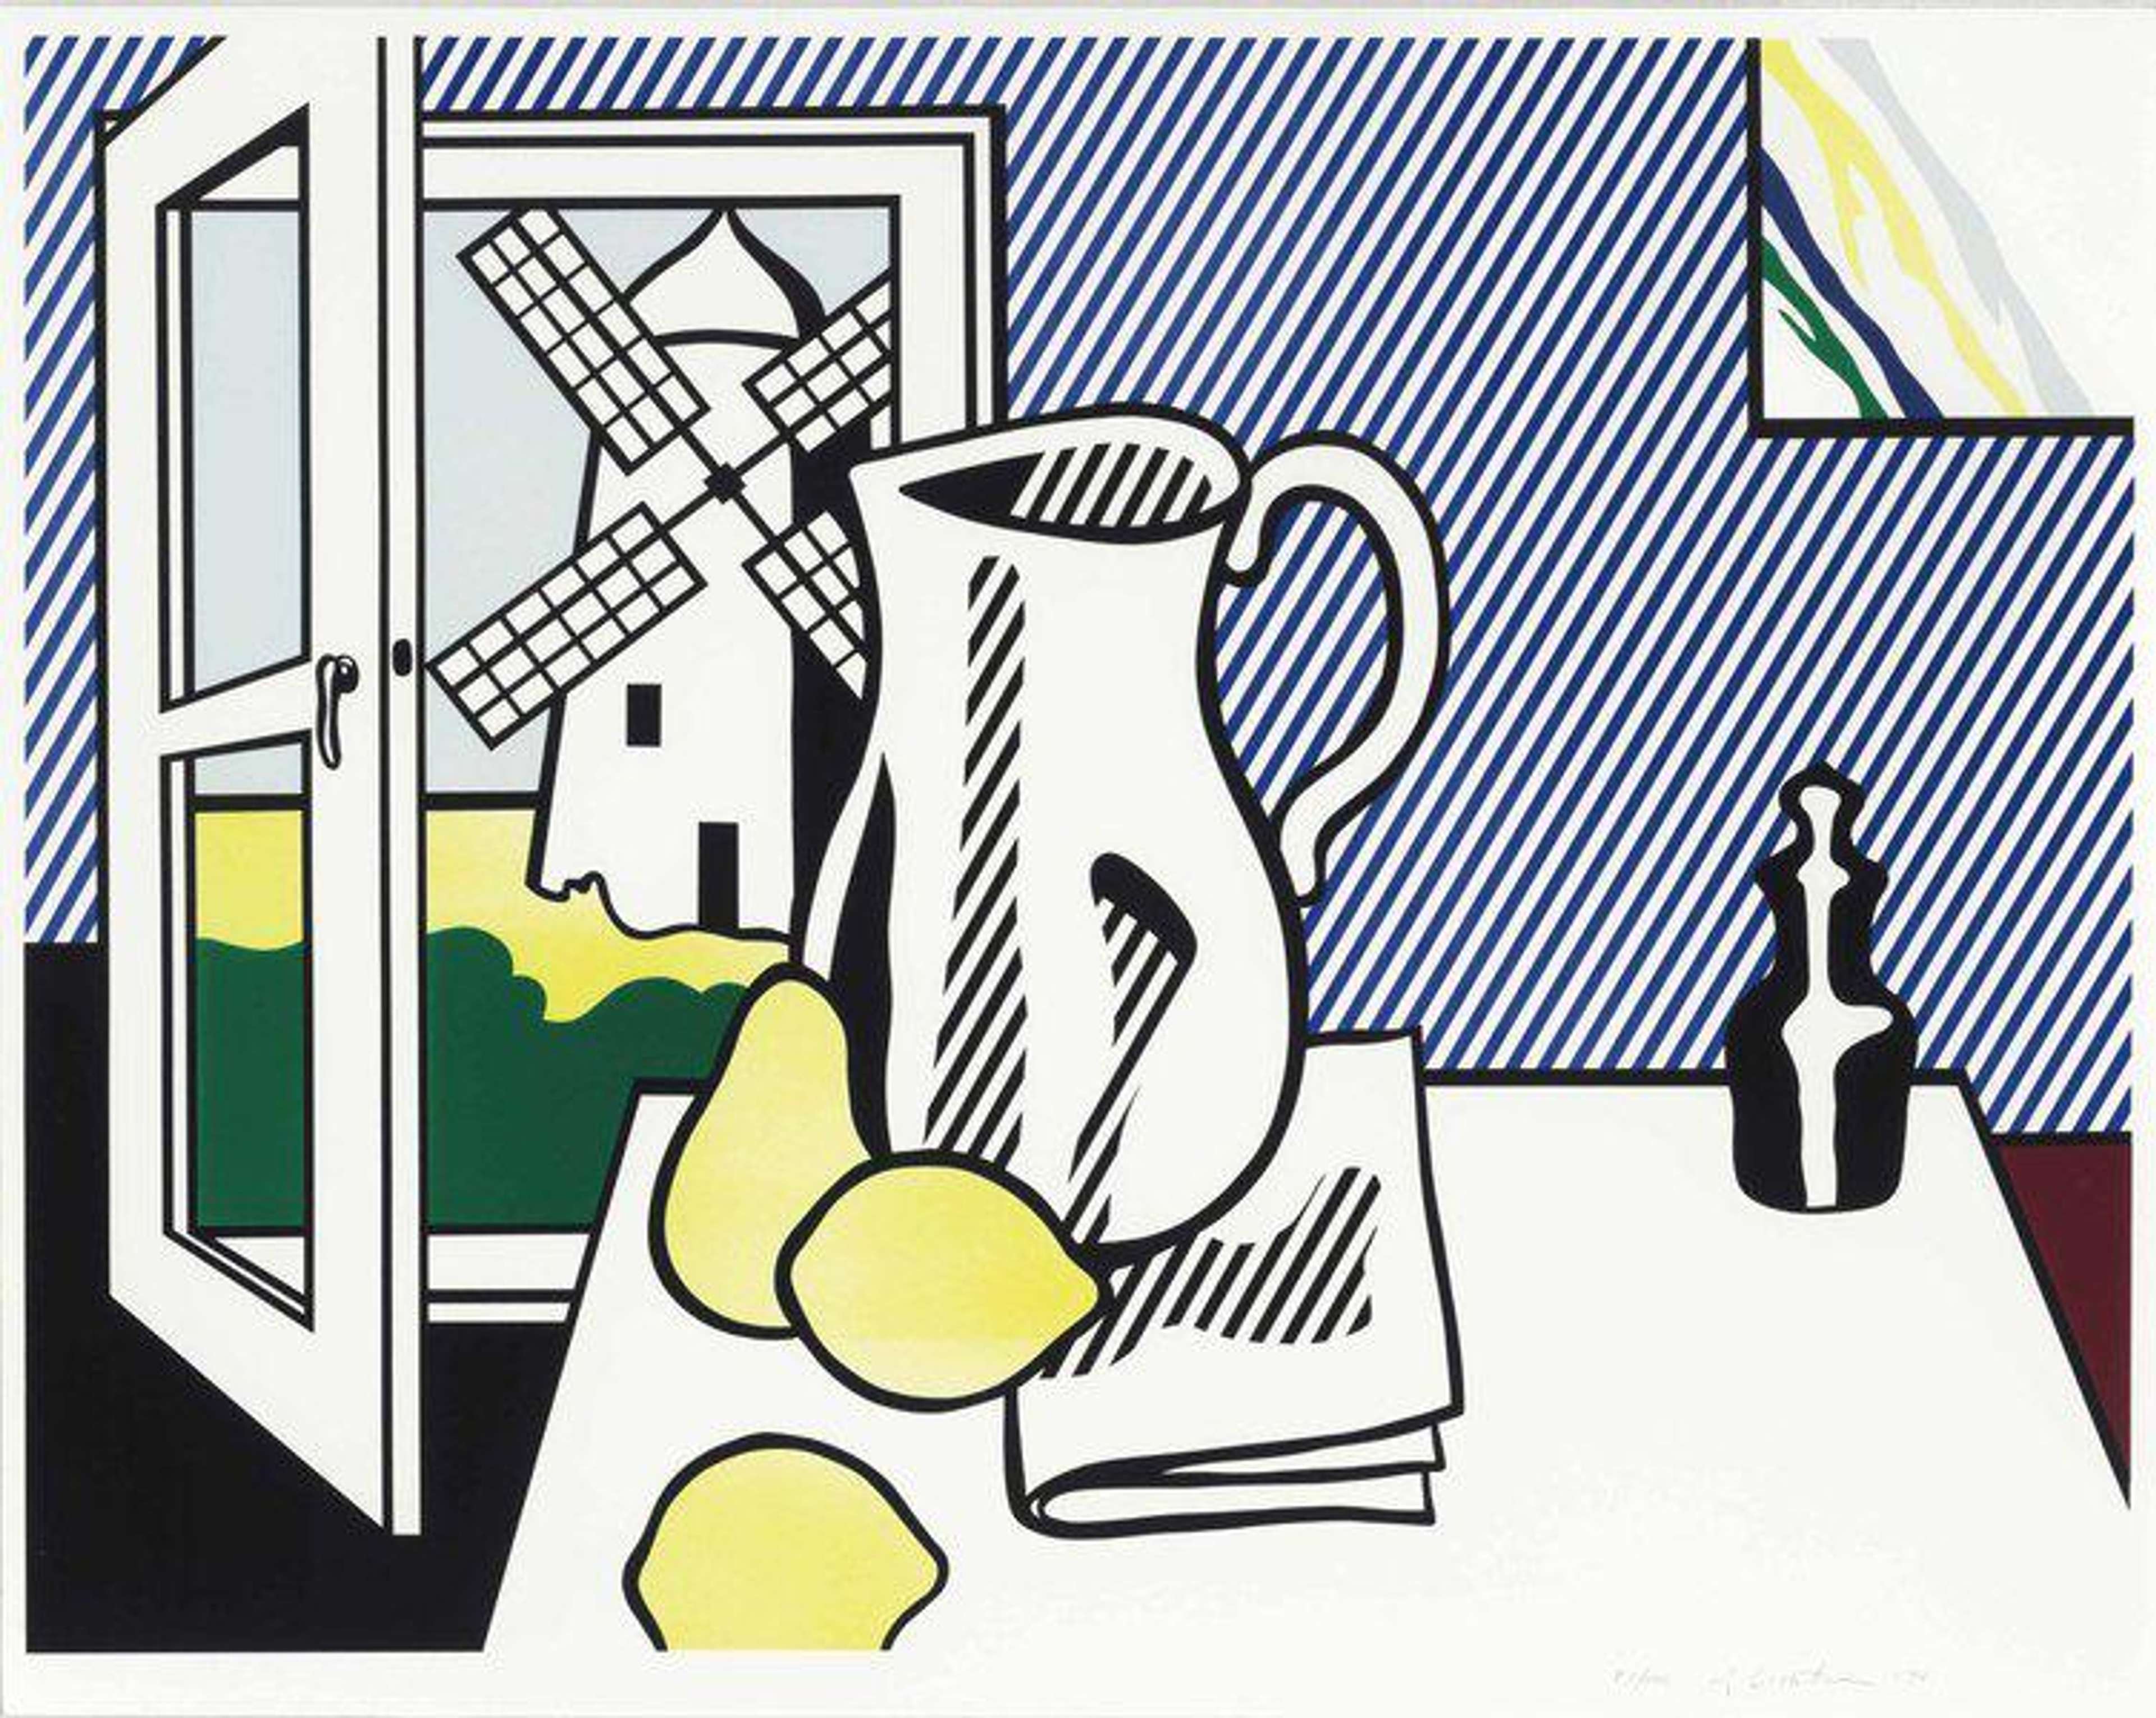 Lichtenstein’s Still Life With Windmill presents a dual composition. It’s anchored by the windmill outside, as well as items such as lemons, a pitcher and a newspaper inside the room.